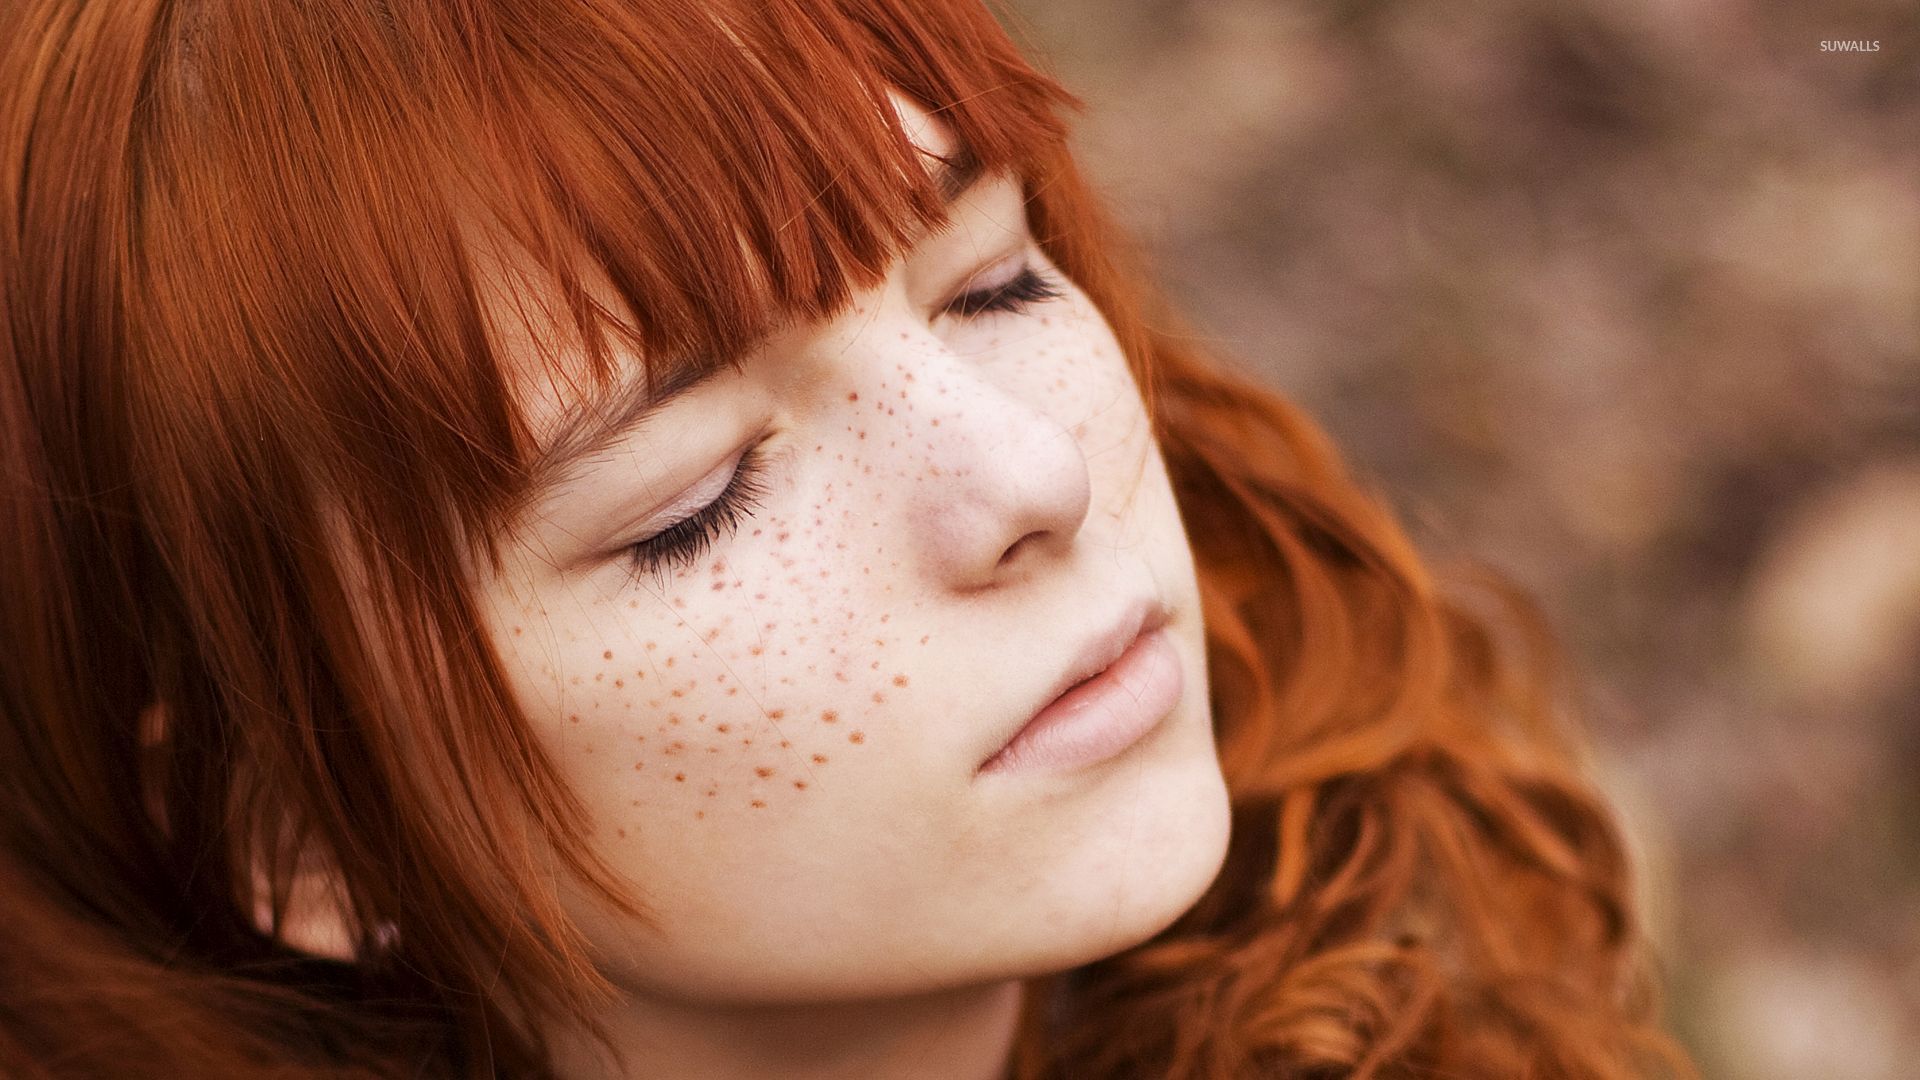 Cute redhead with closed eyes wallpaper wallpaper